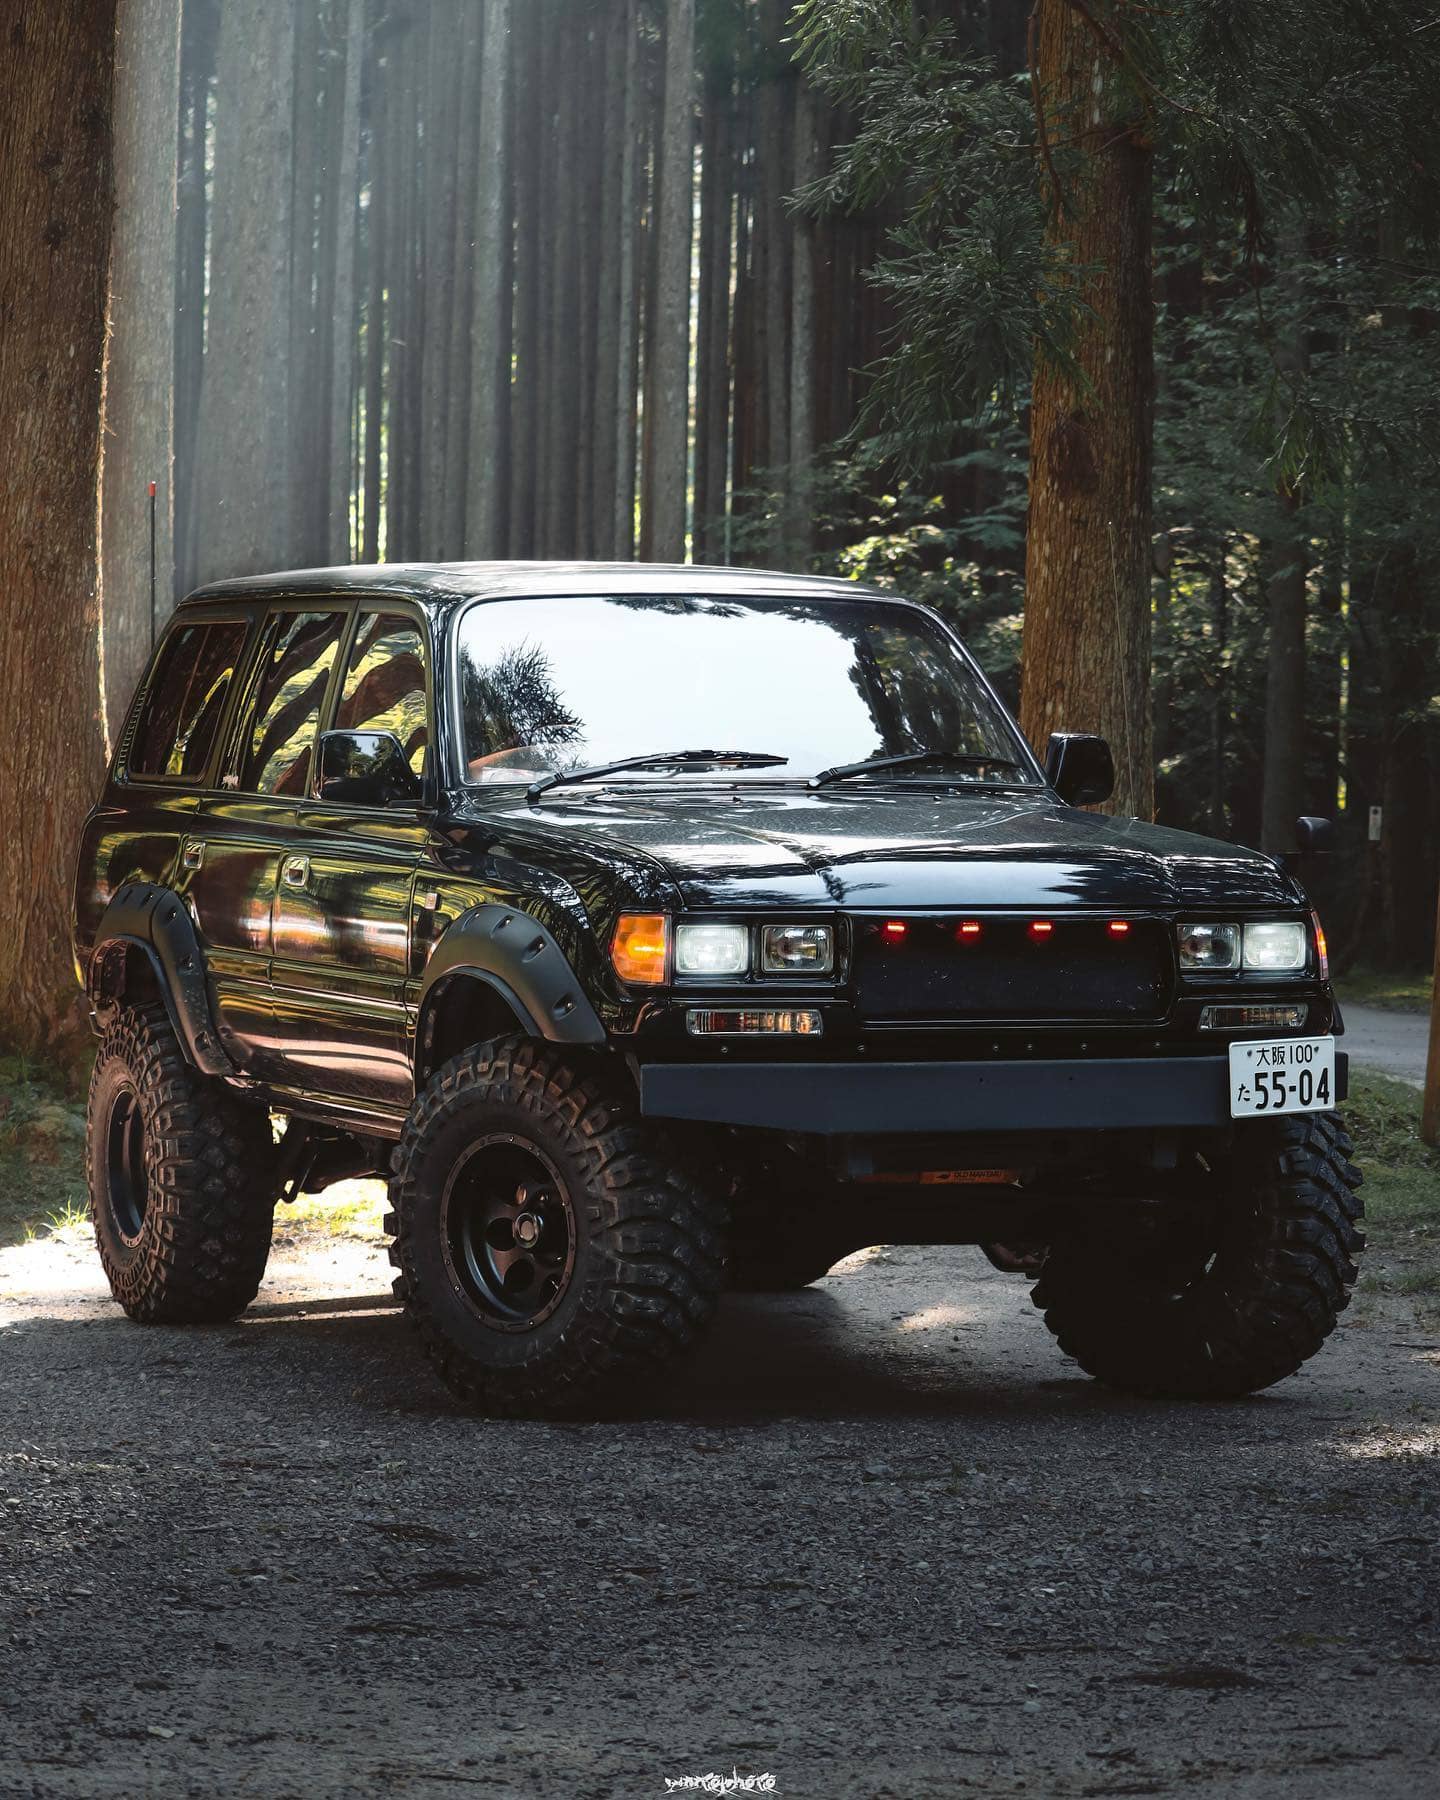 Blacked out toyota Land Cruiser FJ 80 with amber turn signals